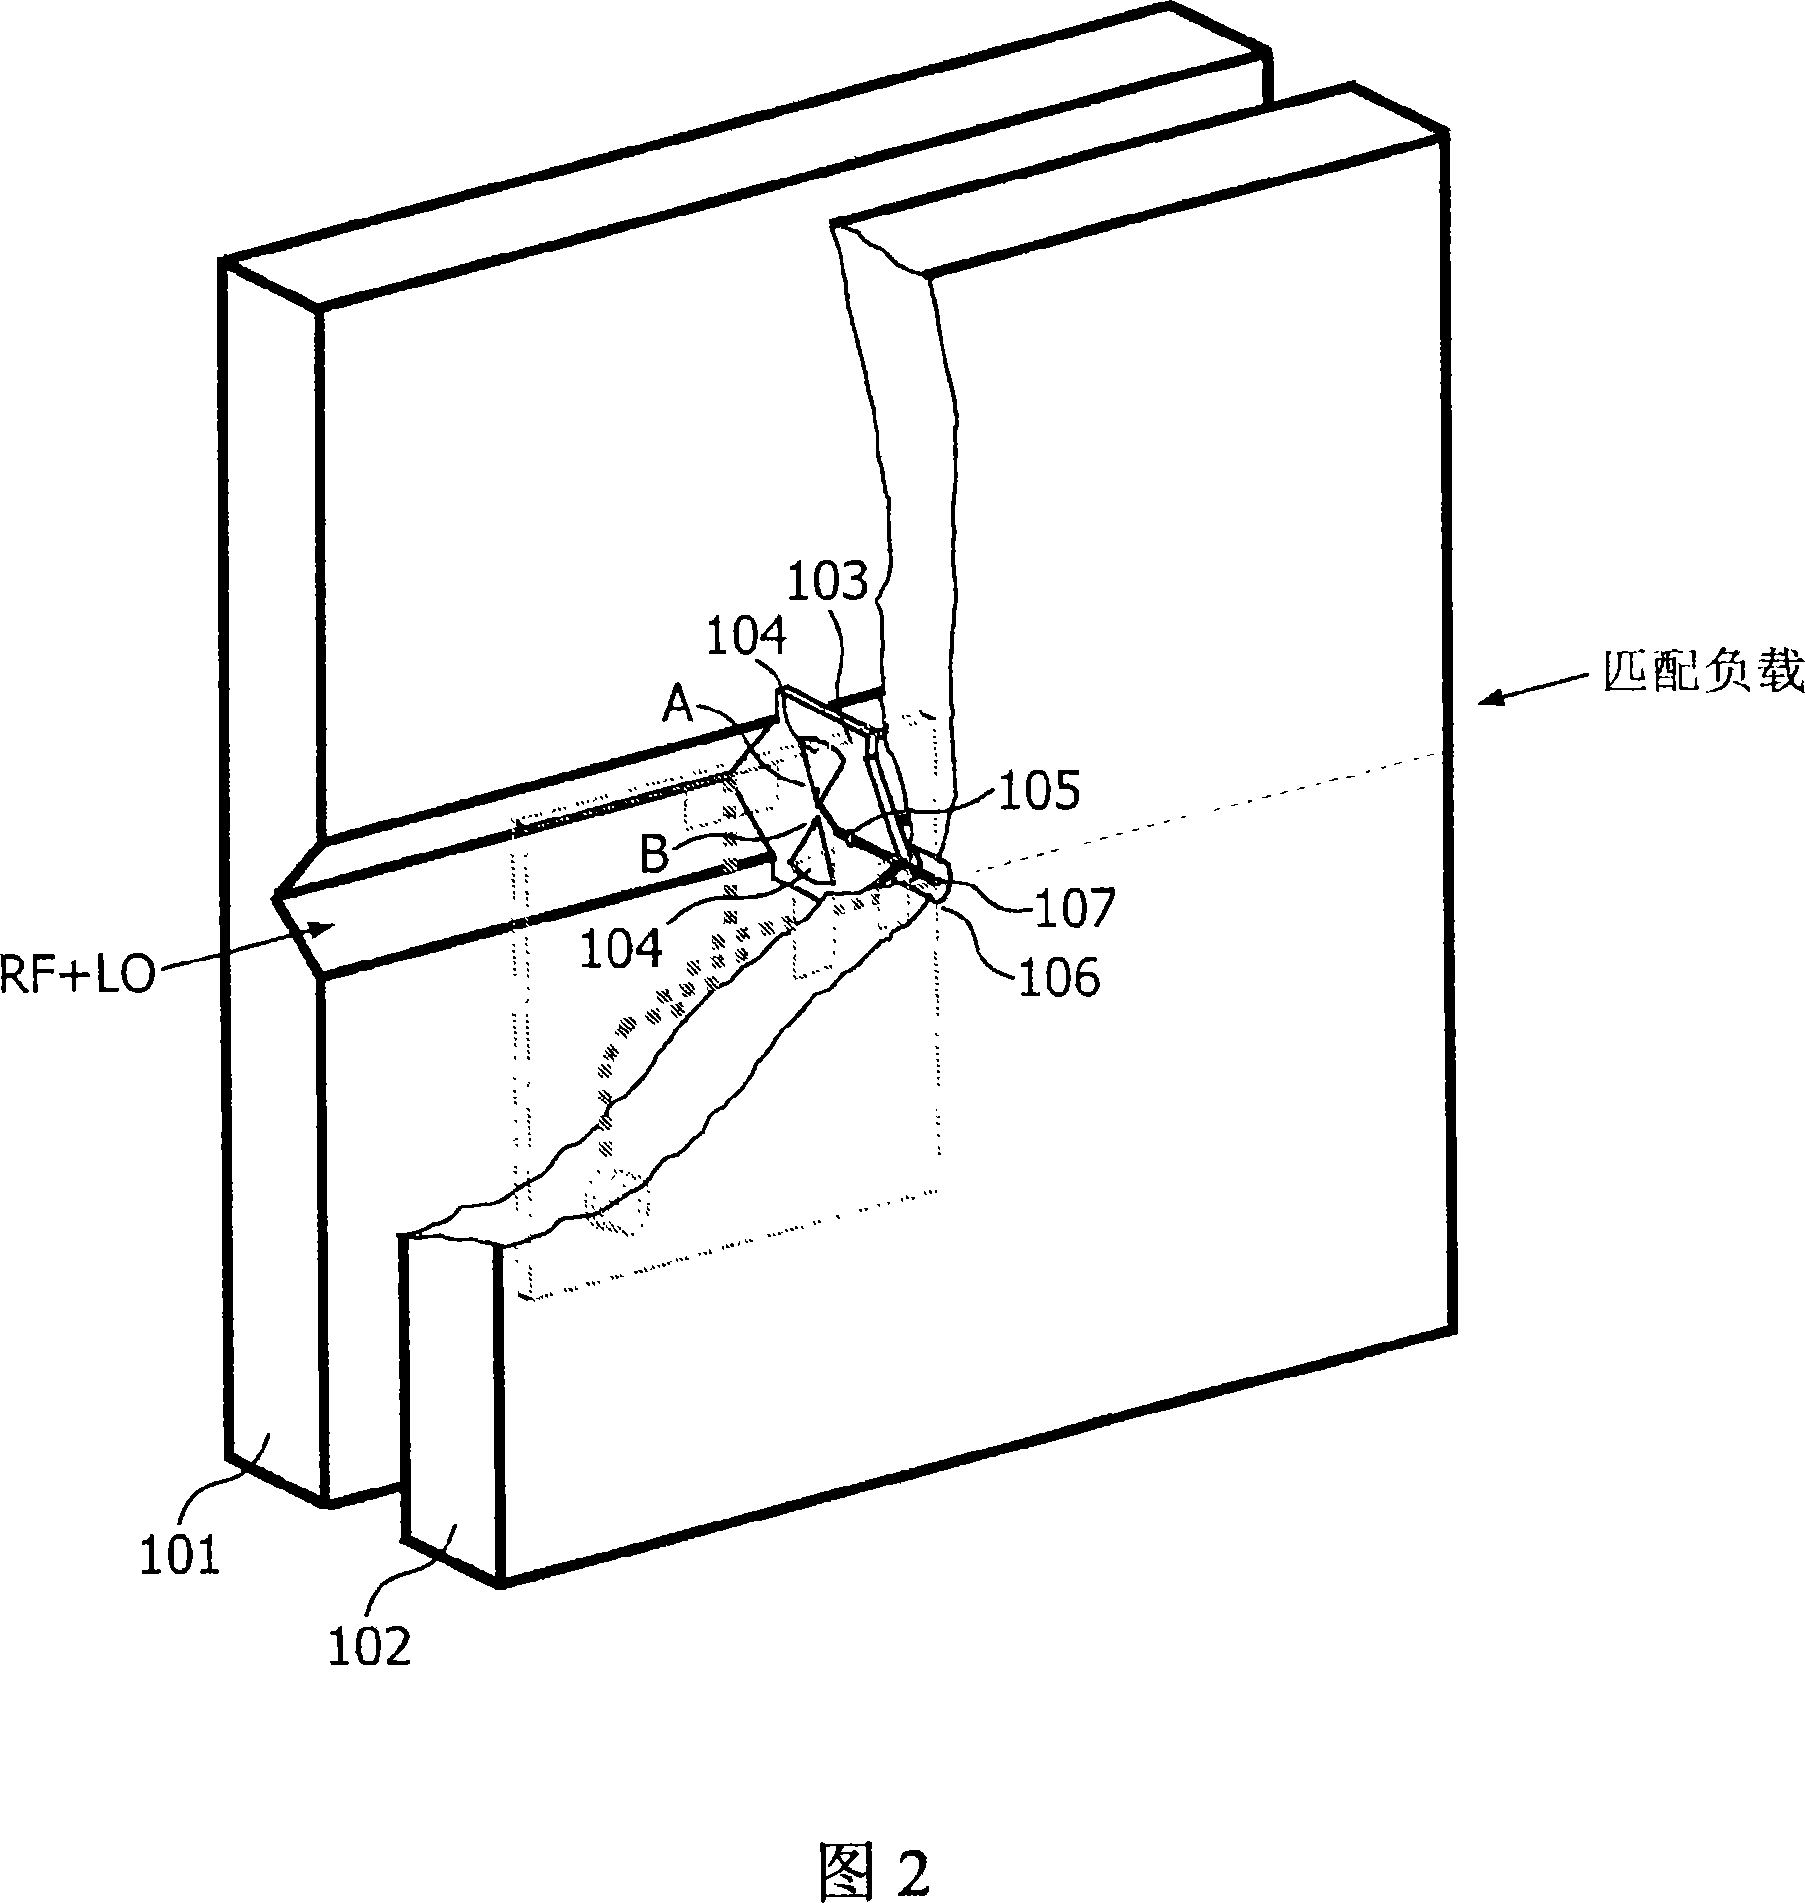 High-frequency electromagnetic wave receiver and broadband waveguide mixer